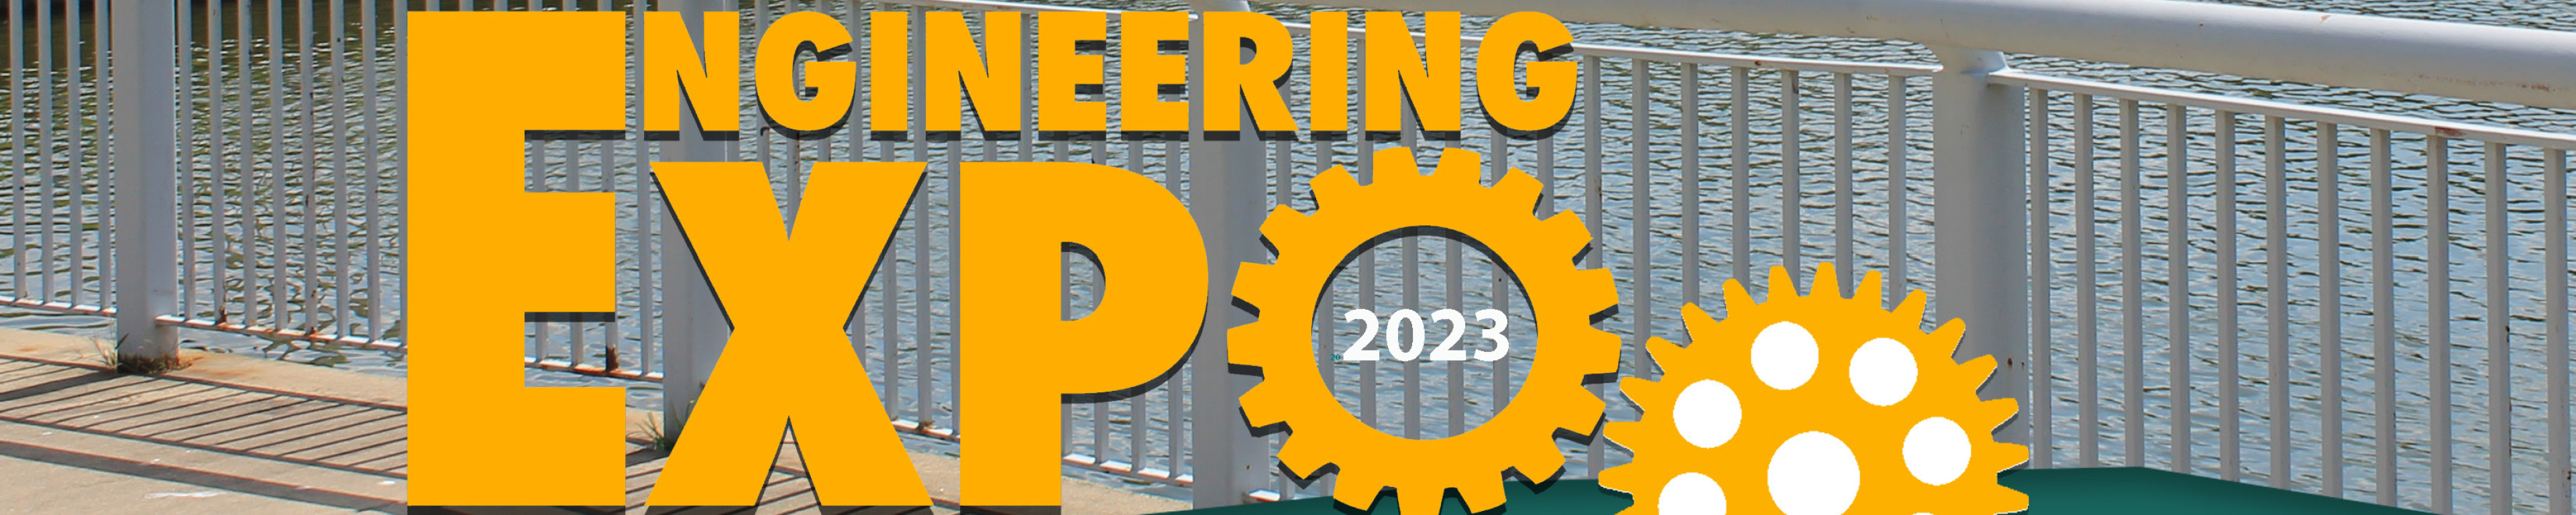 Logo saying Engineering Expo 2023 with gear